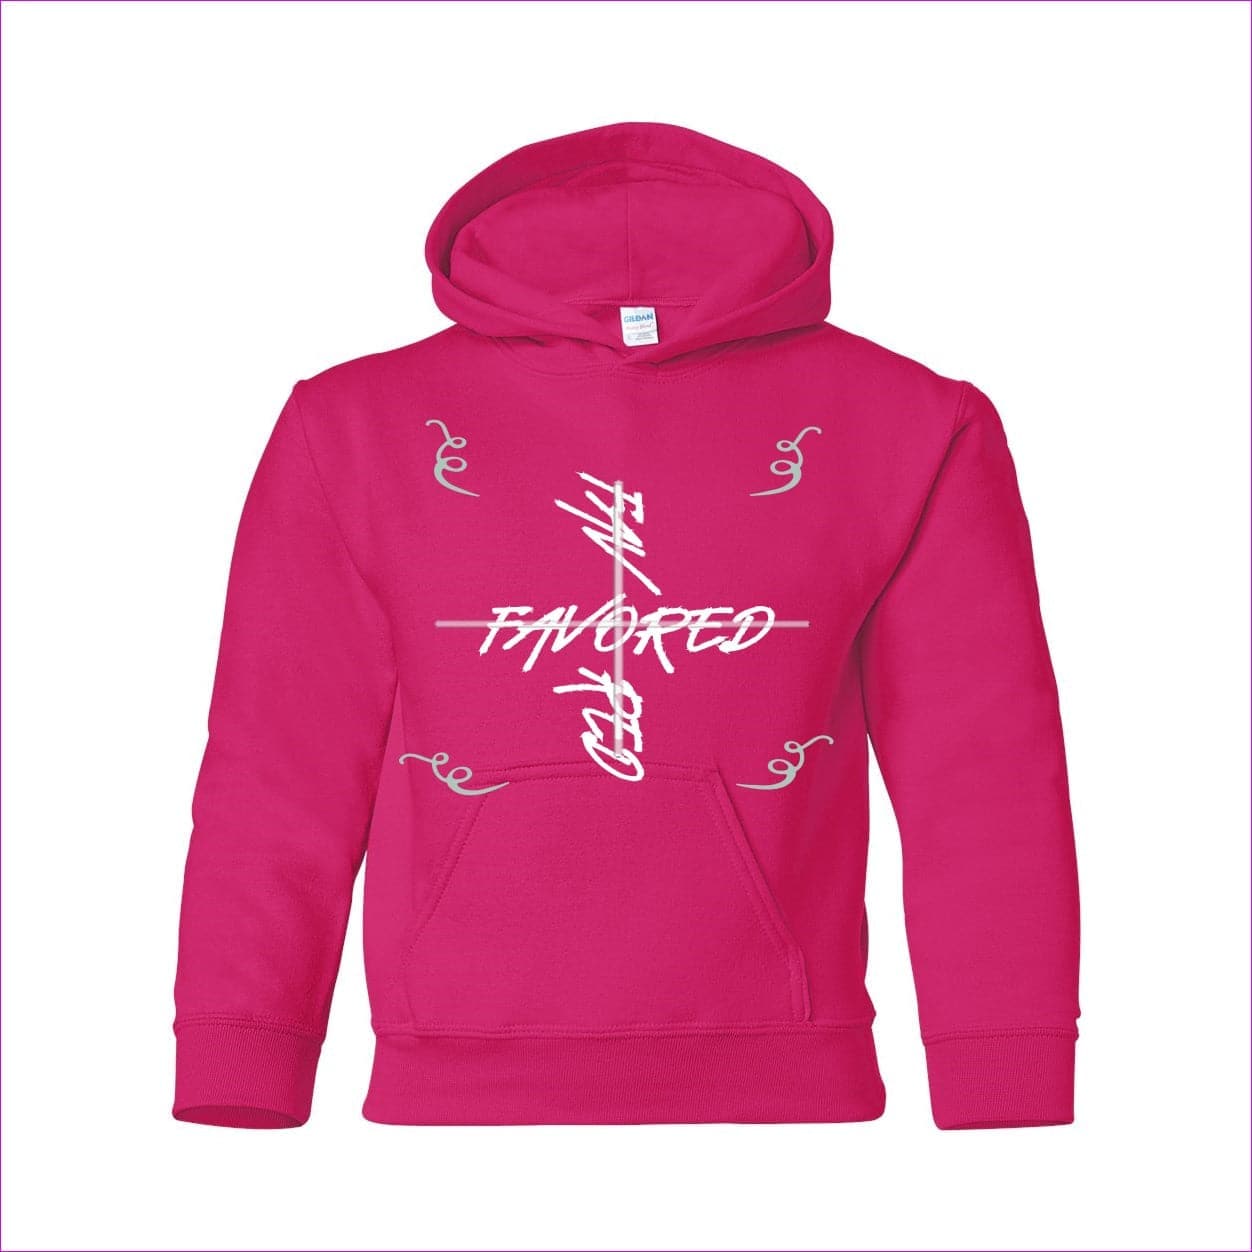 Heliconia - Favored 2 Heavy Blend Youth Hooded Sweatshirt - kids hoodies at TFC&H Co.